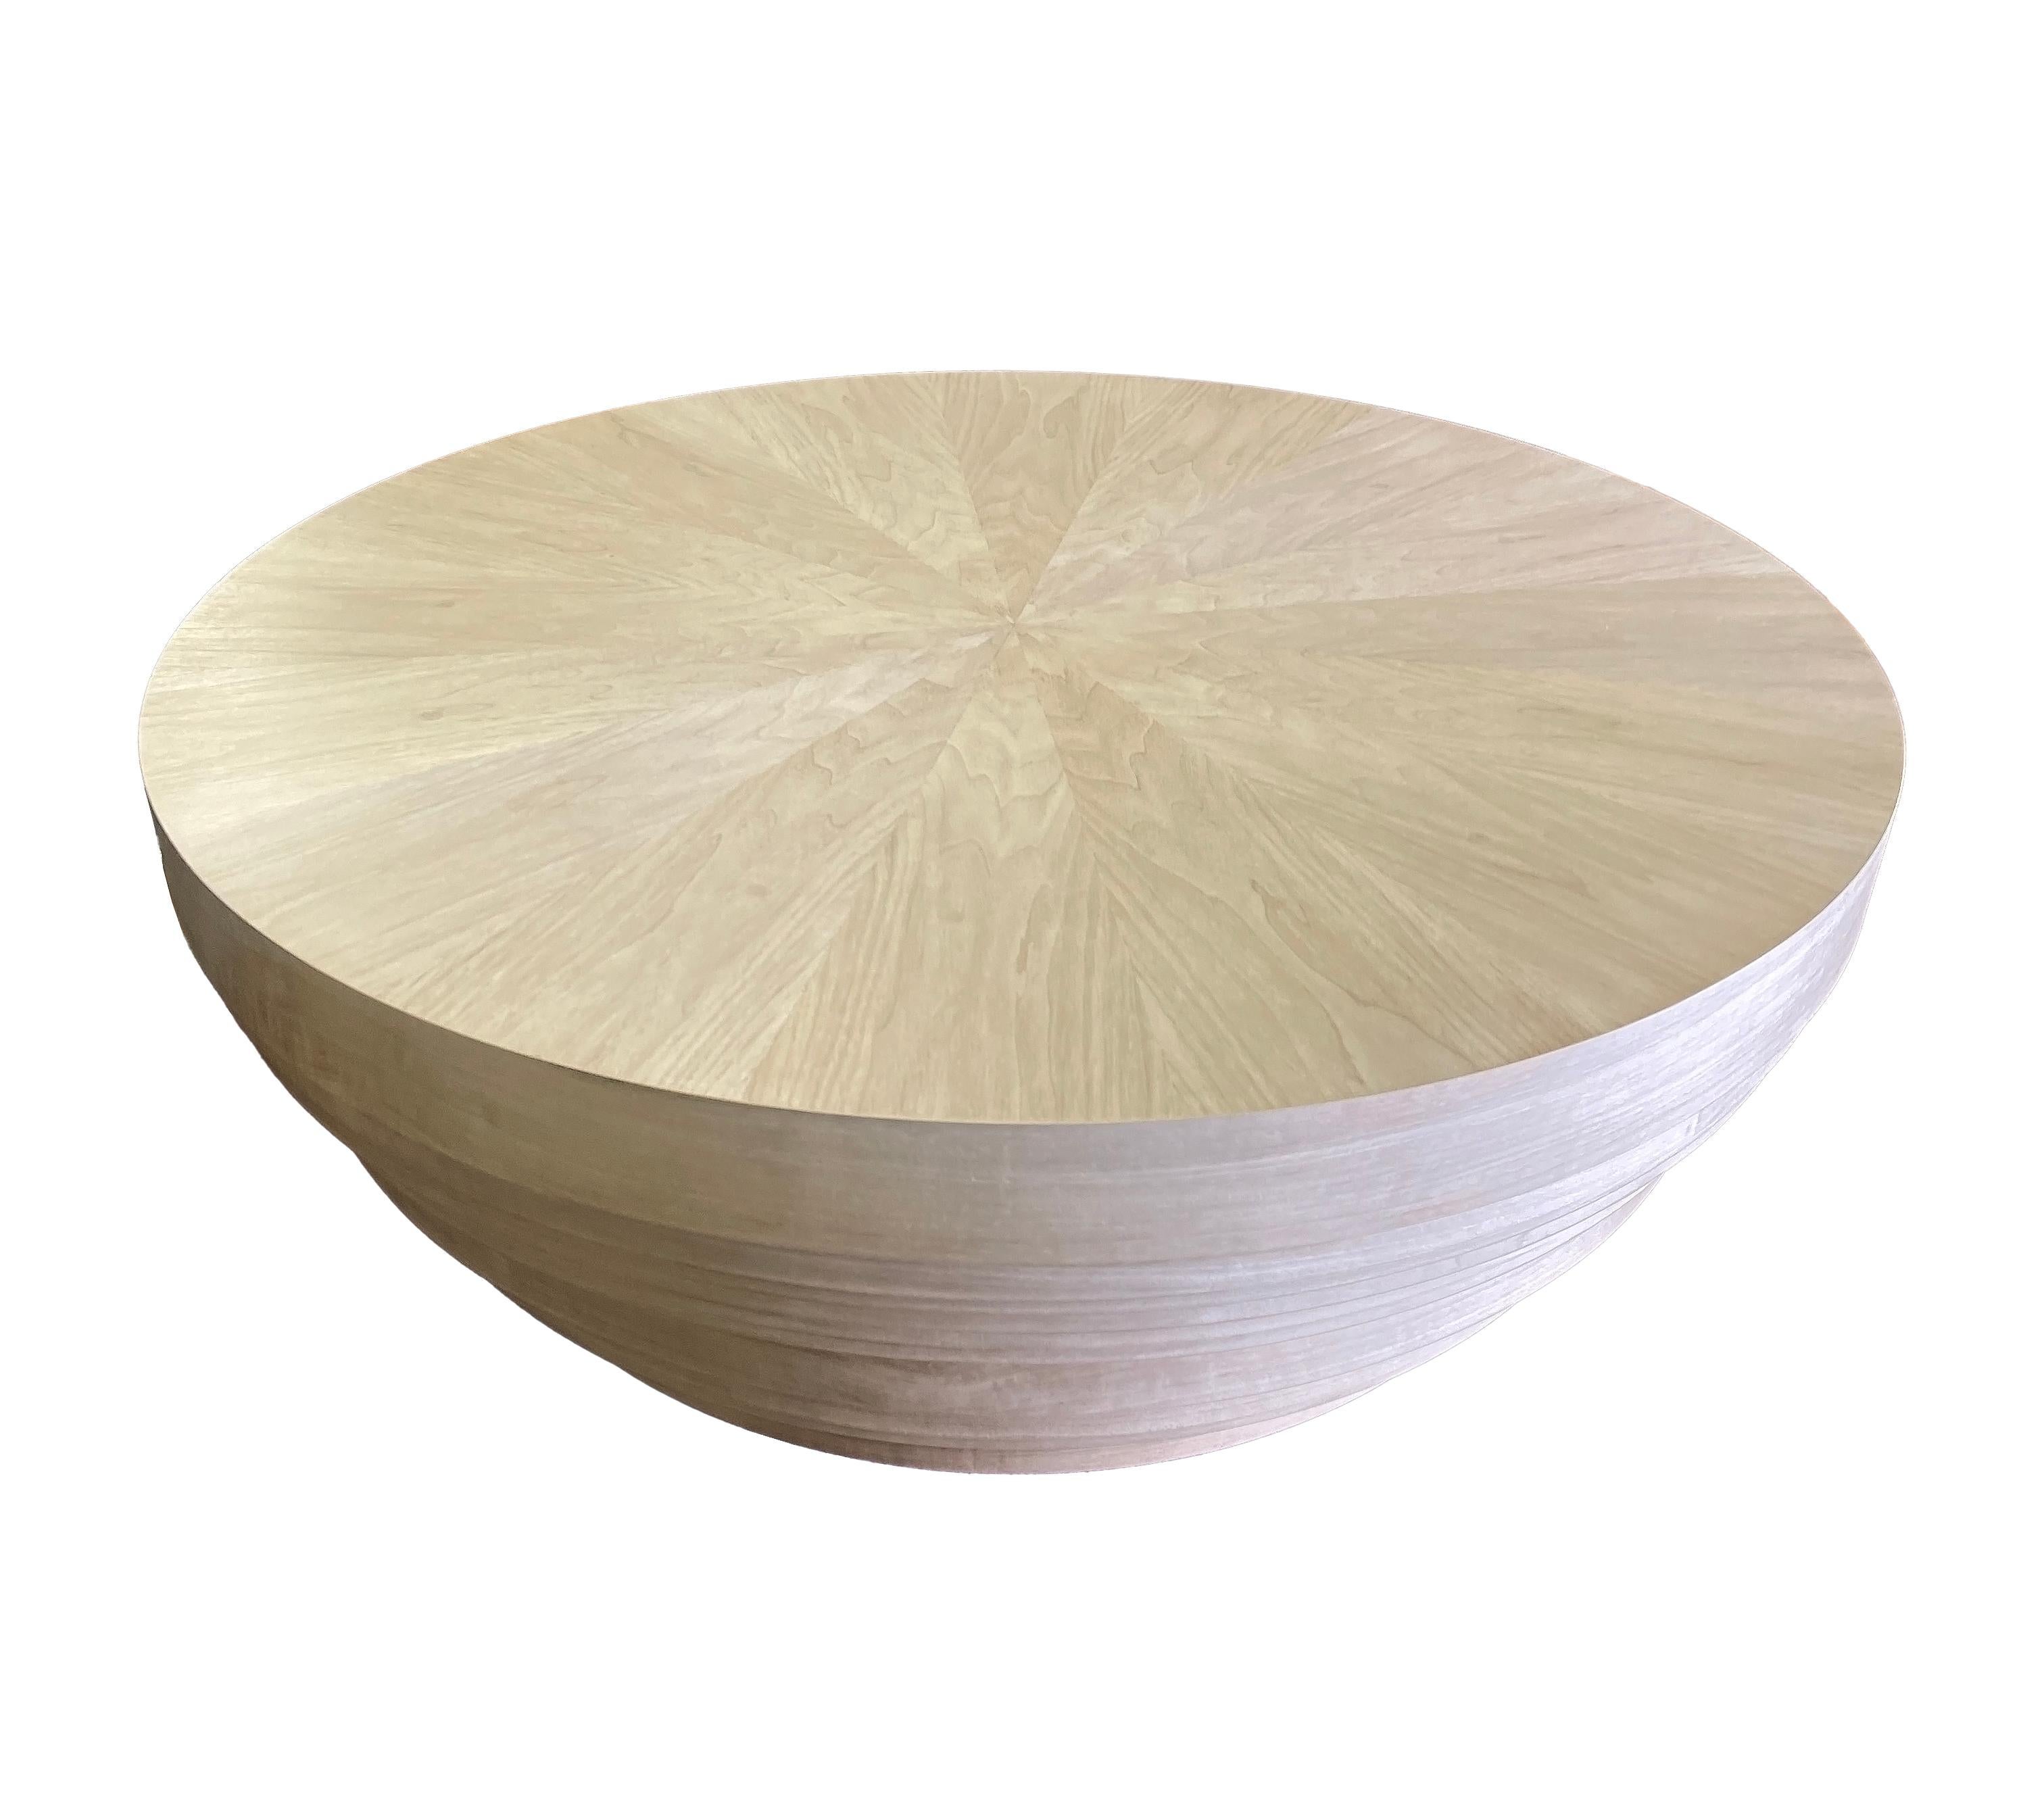 The iconic tribal Jaya drum table is handcrafted with traditional joinery, fabricated with multiple stacked discs in various sizes, toped with a book-matched sunburst, the Drum table is finished with a lustrous polish. Custom sizes and finishes